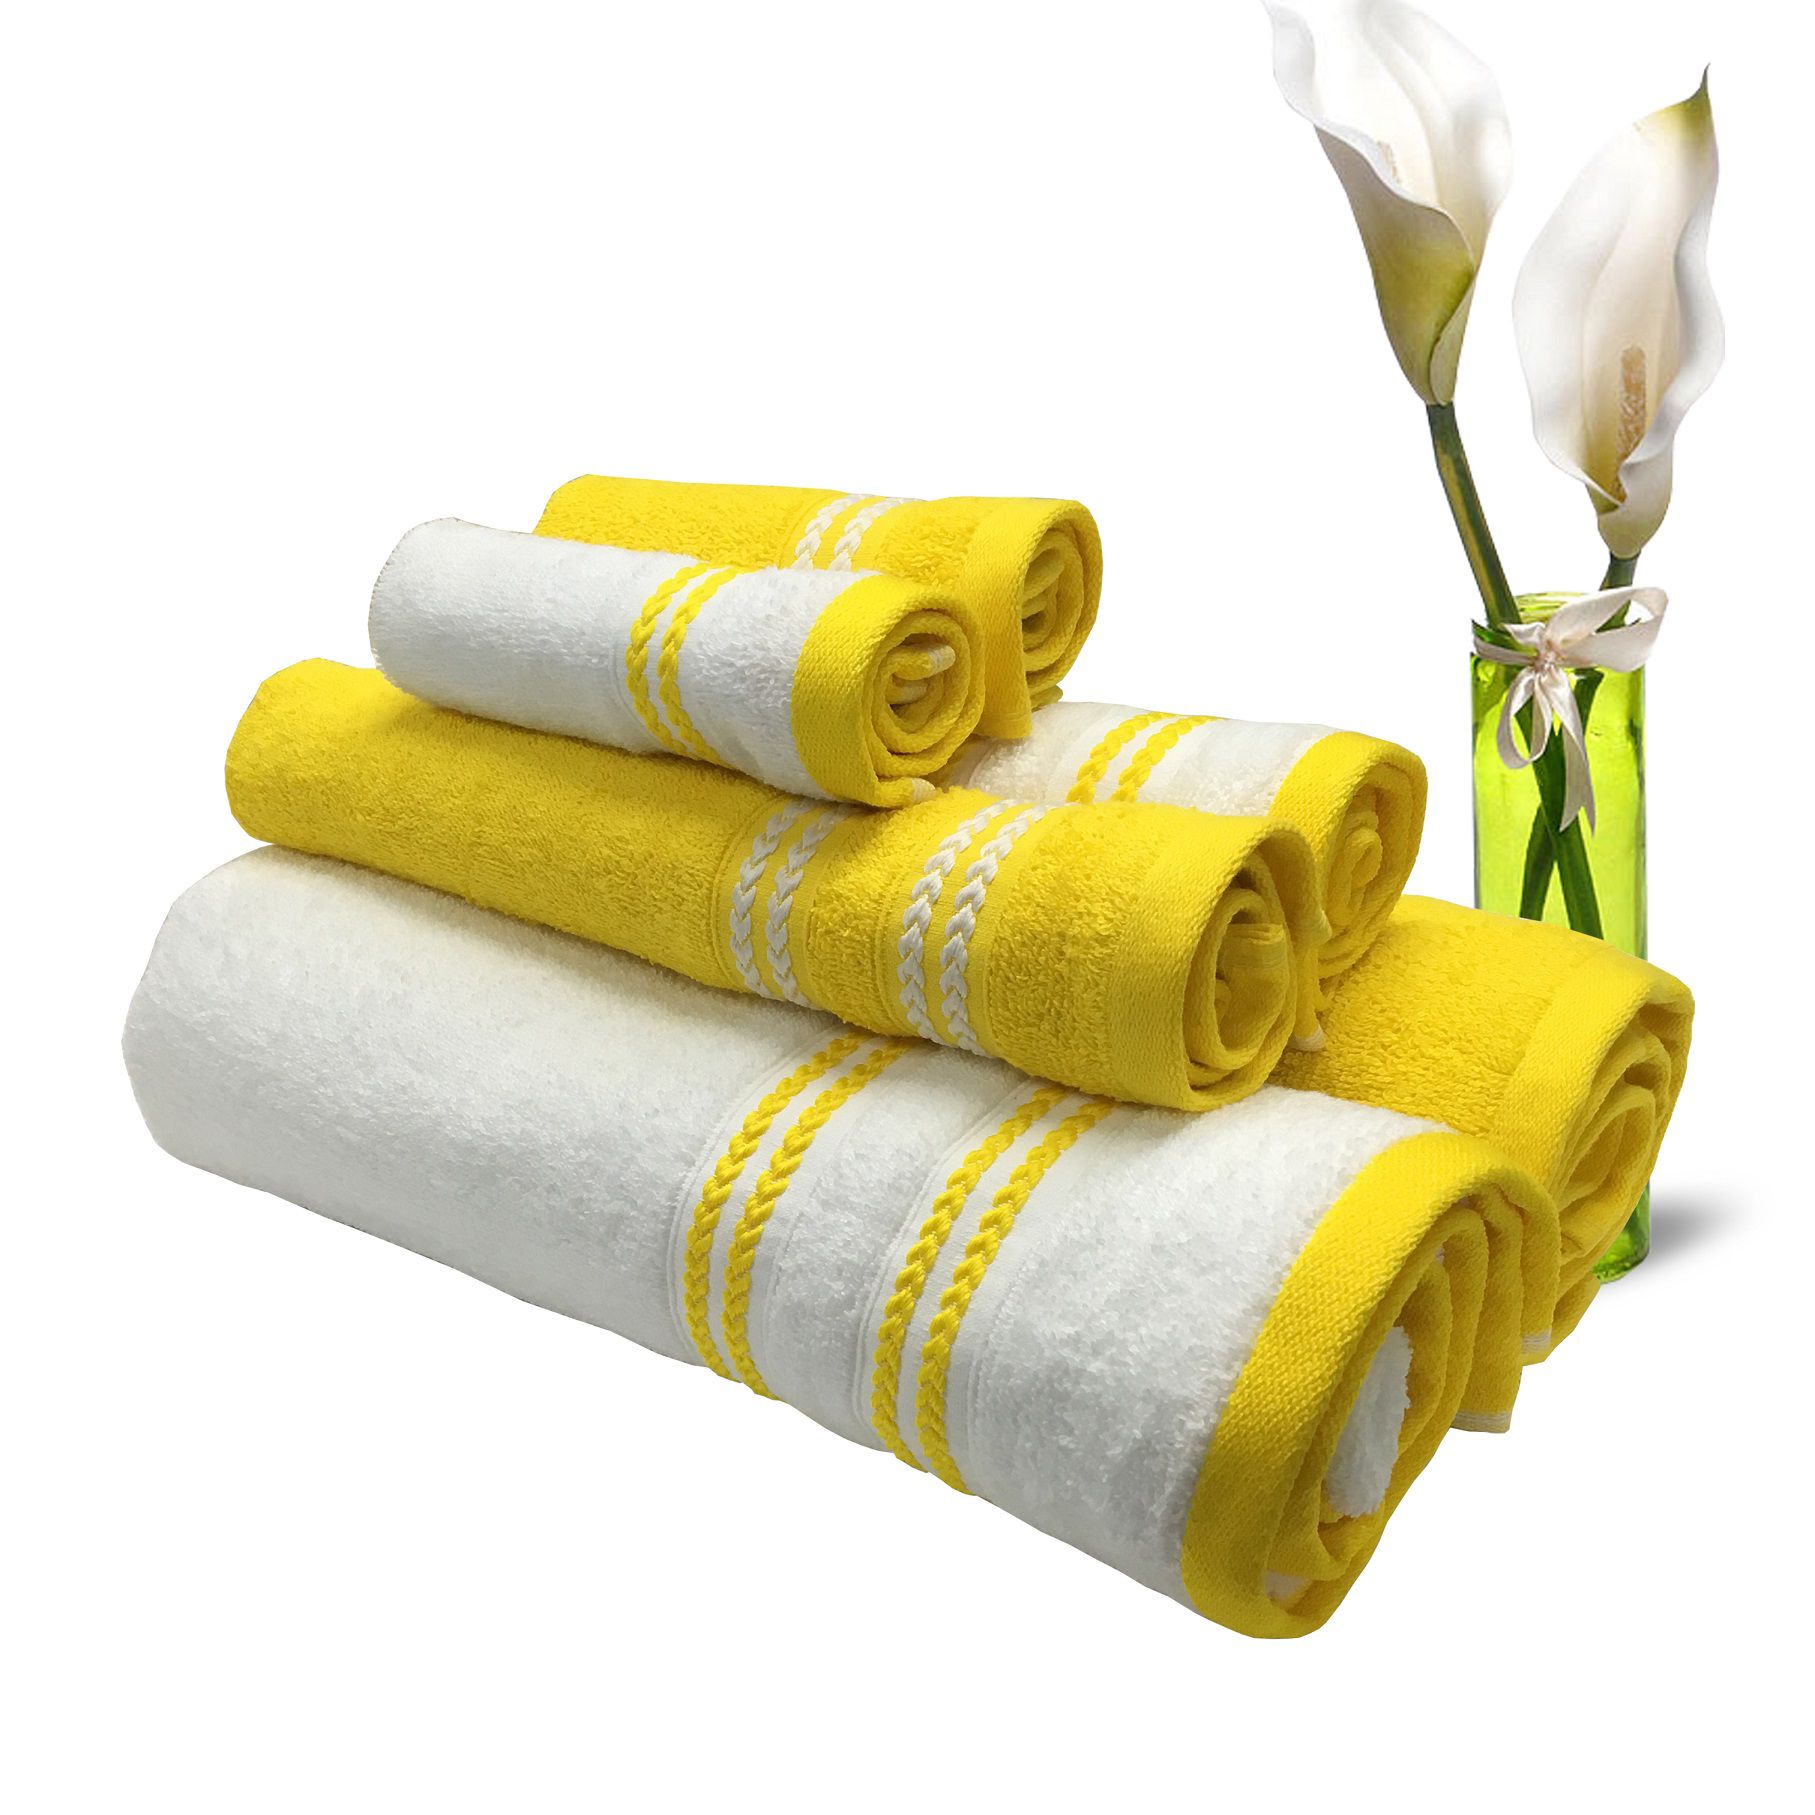     			Spaces Set of 6 Bath+Hand+Face Towels Yellow